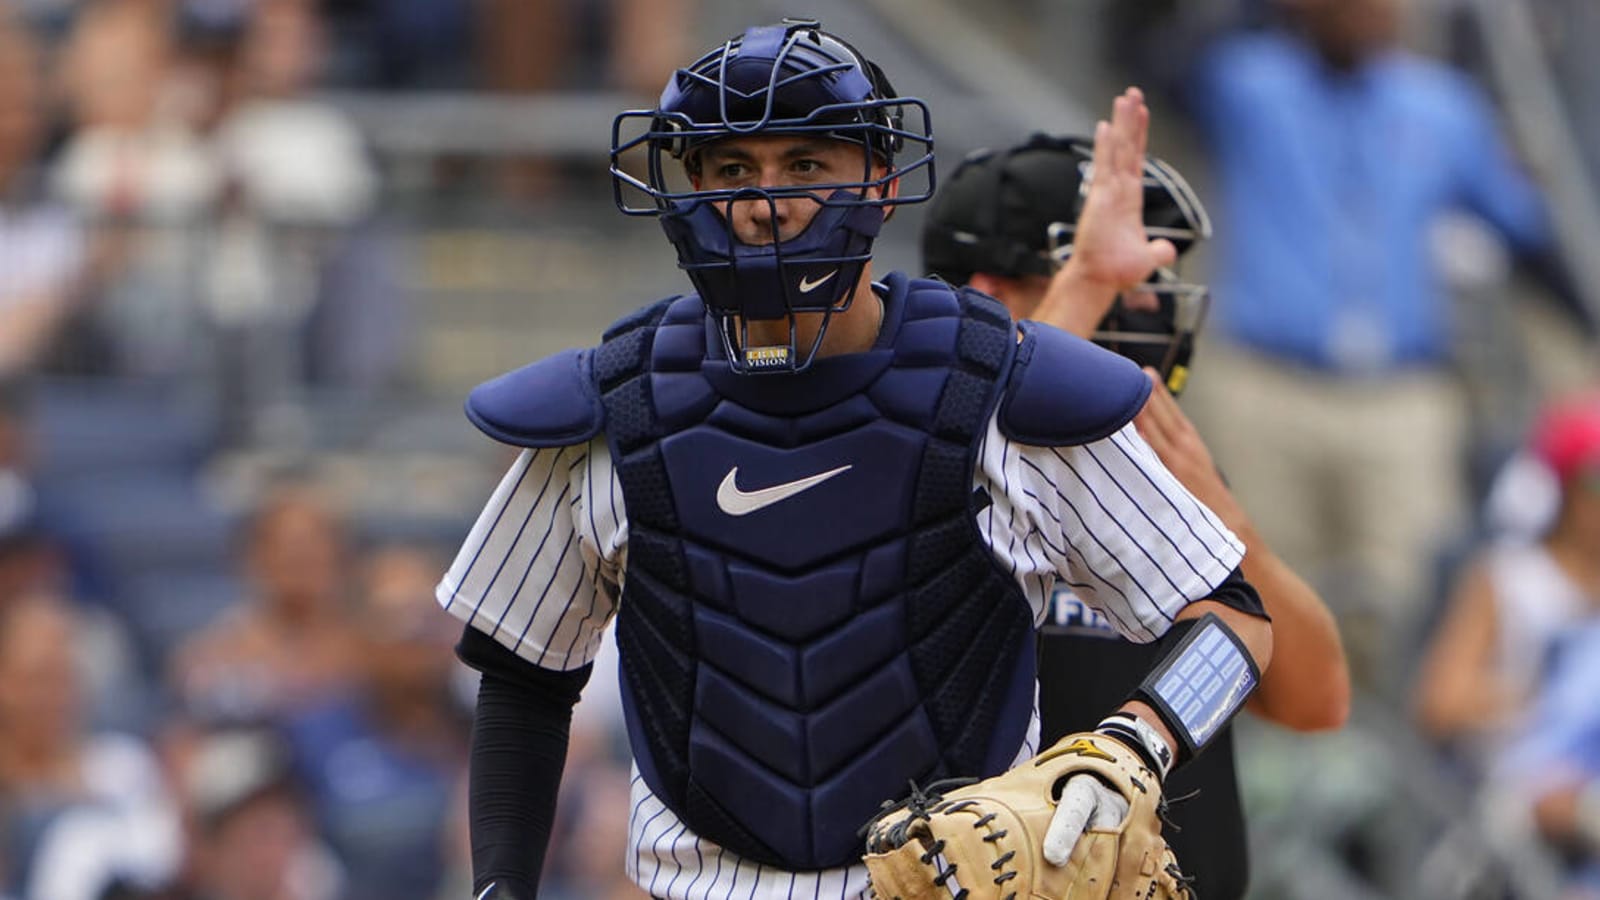 Yankees catcher pledges game-worn cup to fan who catches Aaron Judge milestone HR